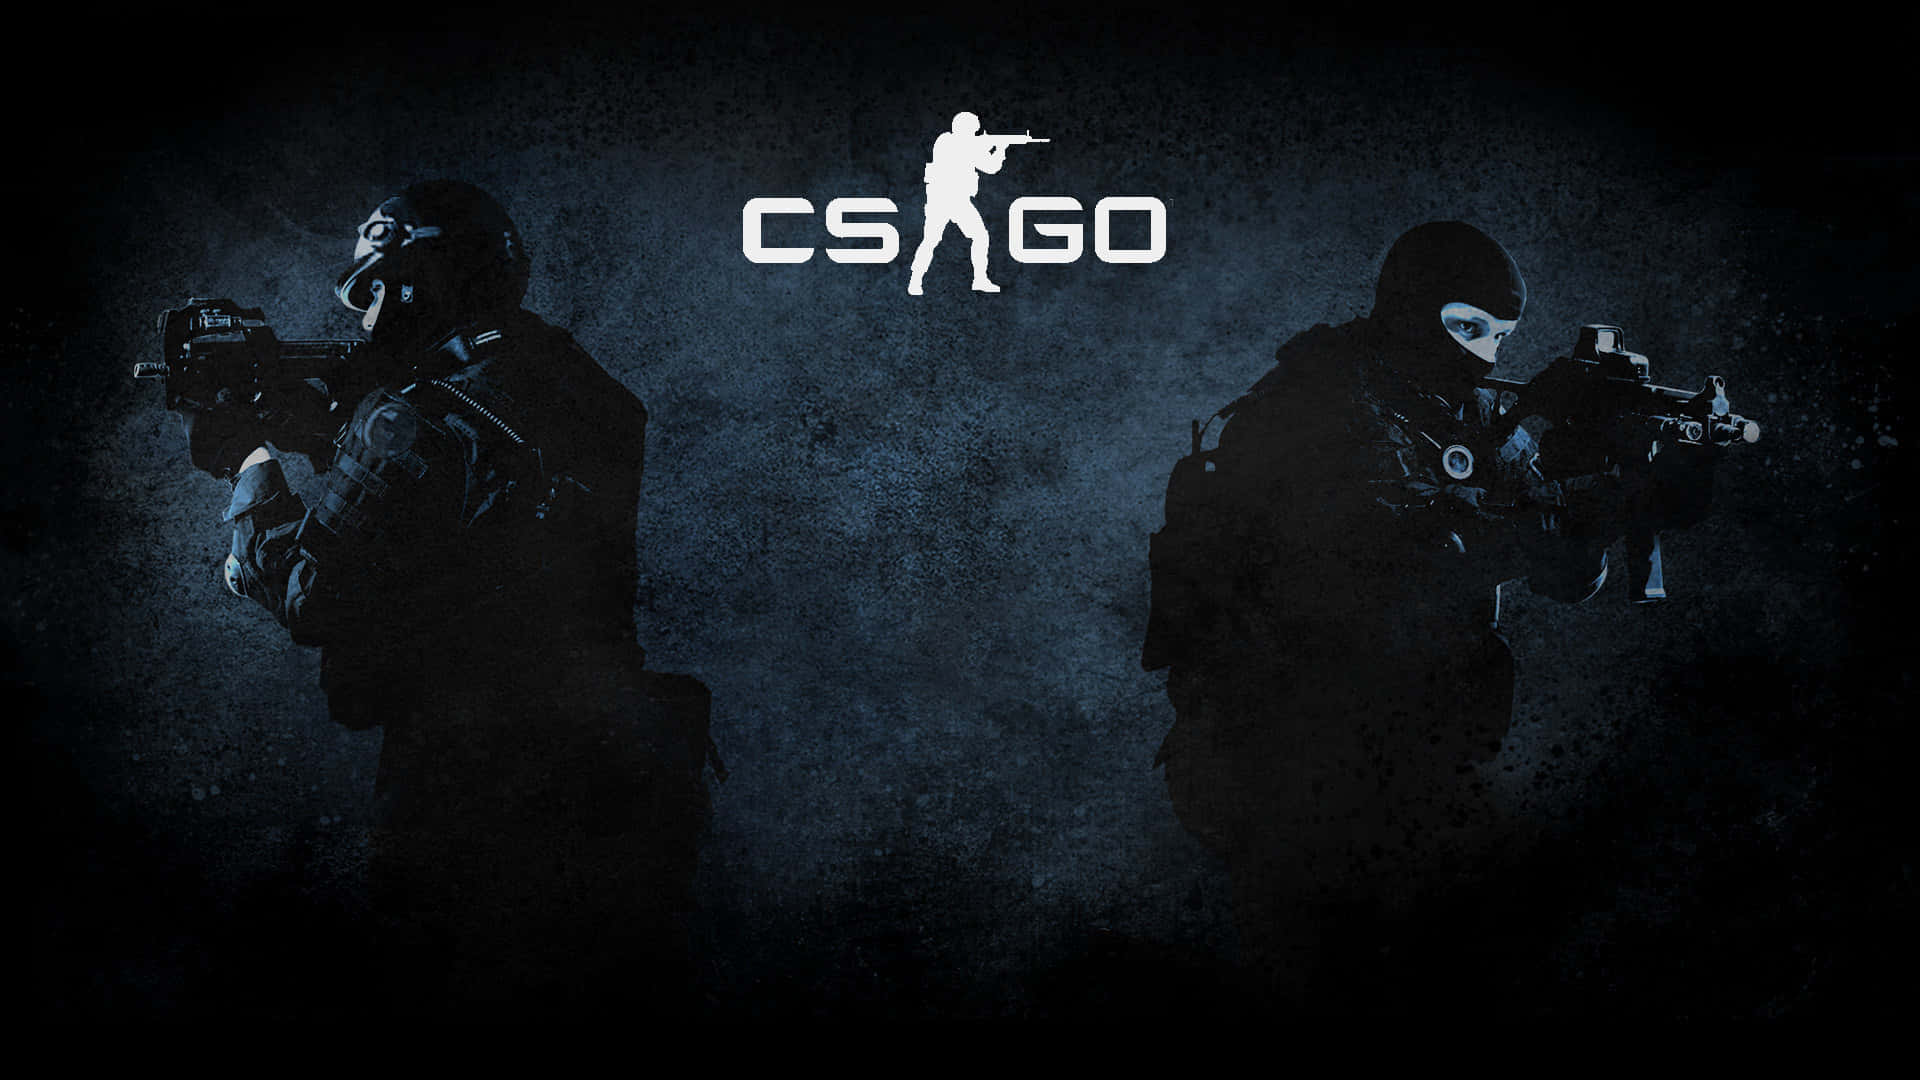 Top-notch CS:GO Gameplay, Made with the Best